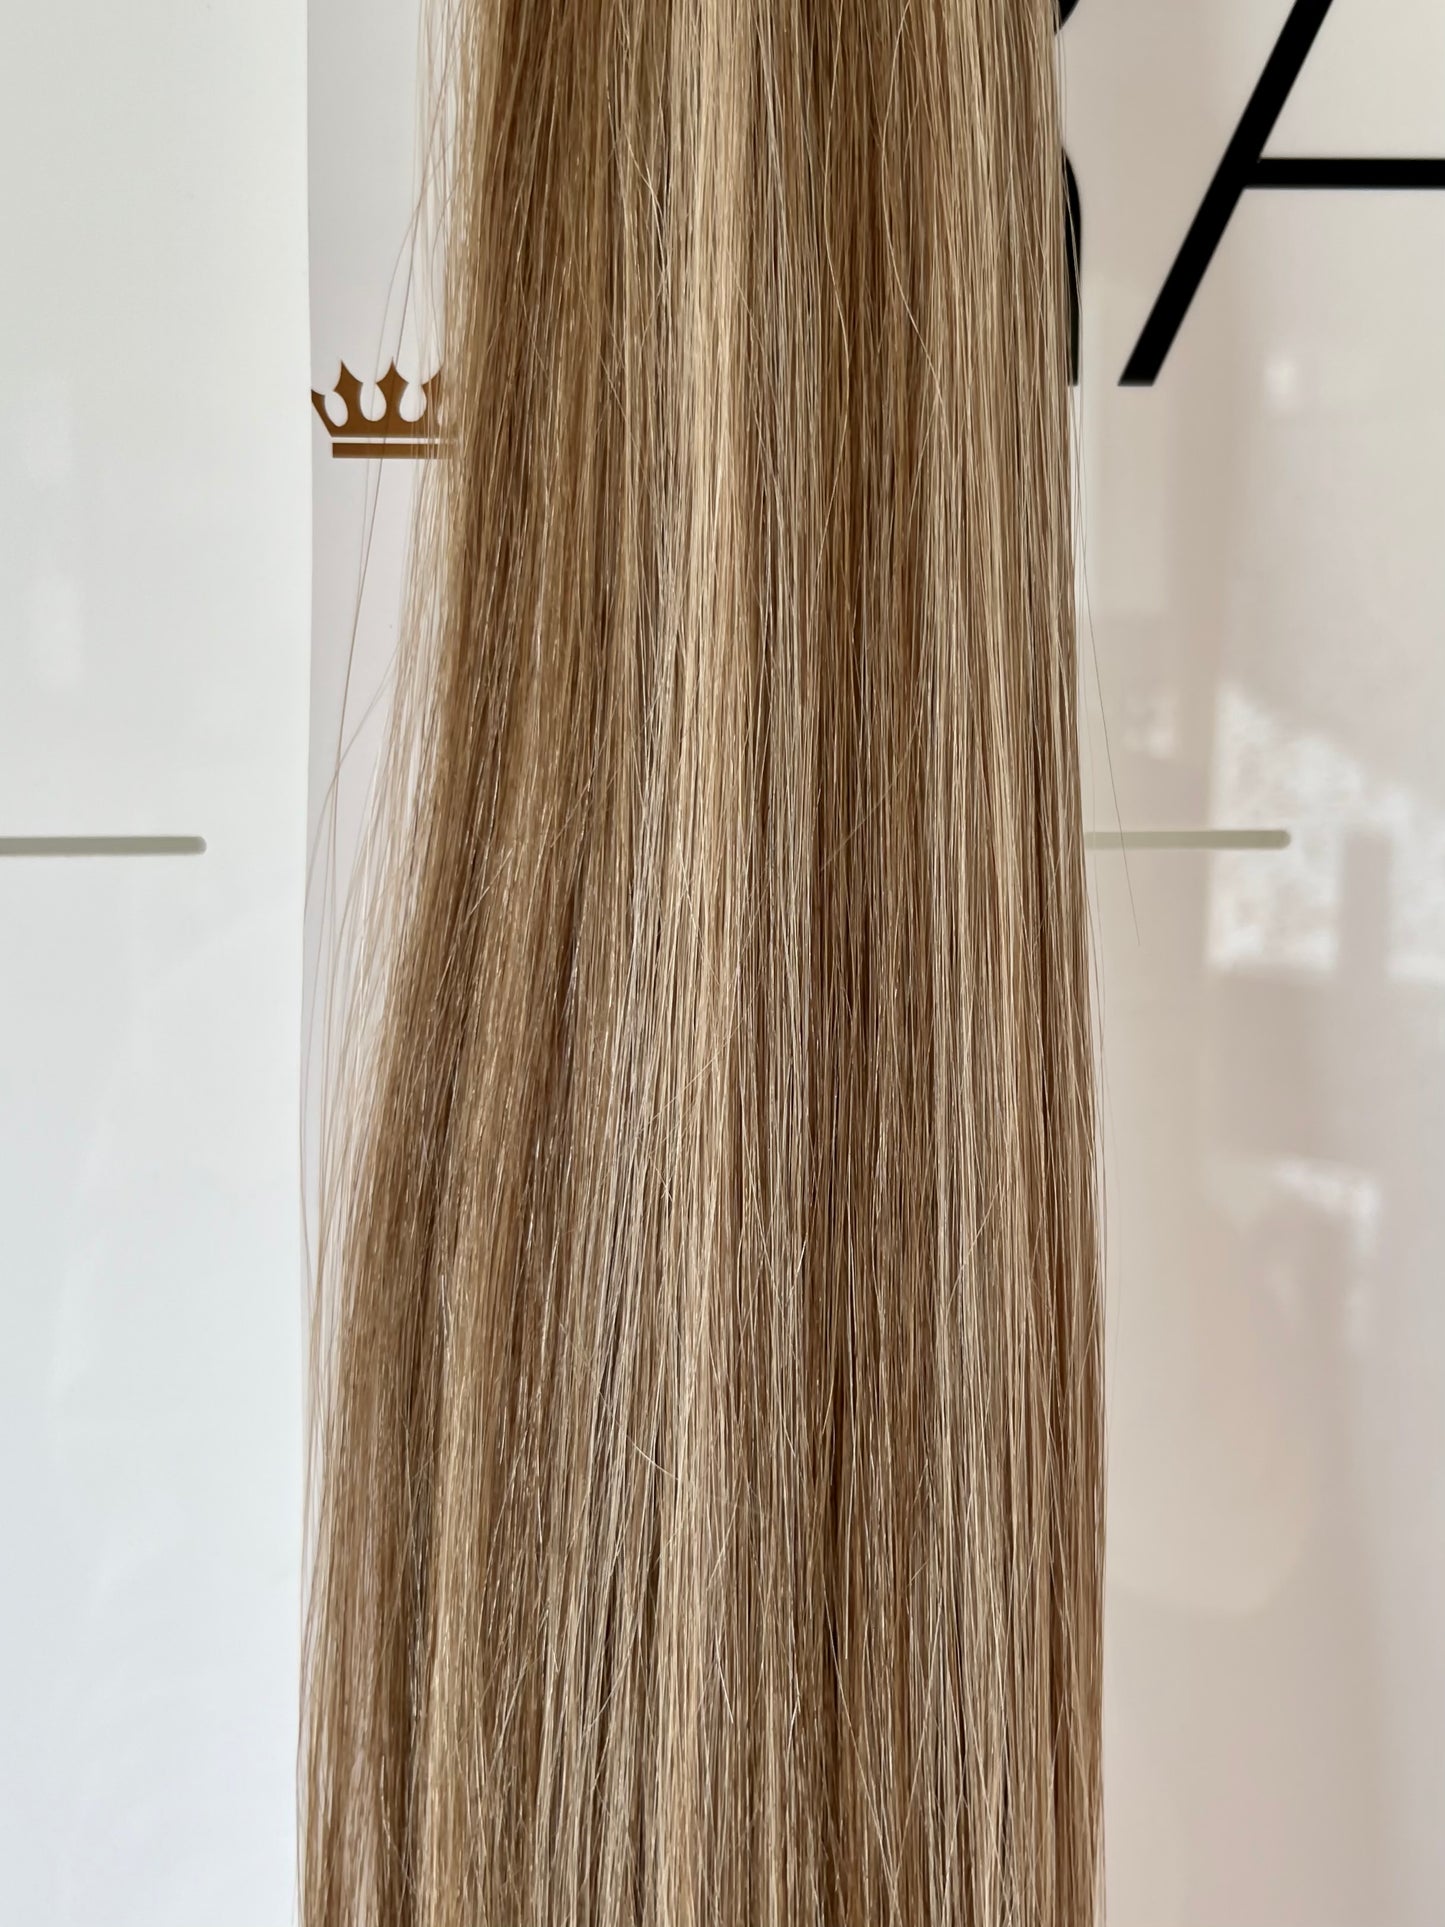 RETAIL CLIP IN EXTENSIONS - HIGHLIGHTED - ROYAL BRONDE